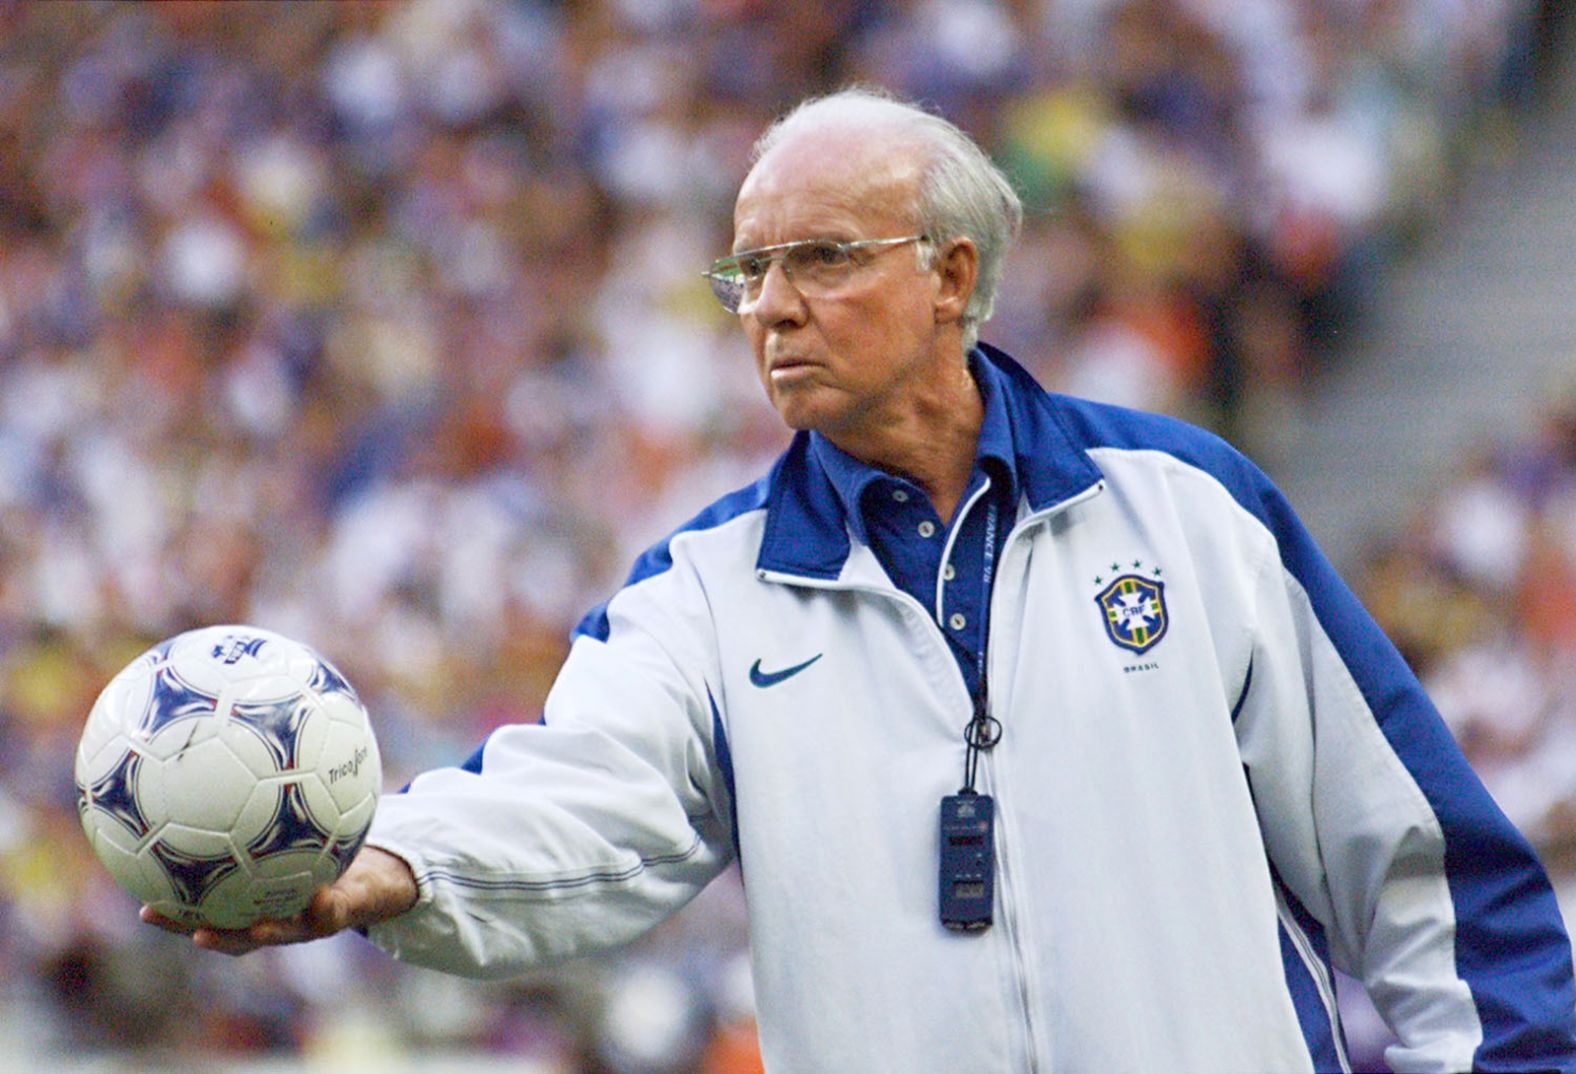 Soccer icon <a href="https://www.cnn.com/2024/01/06/sport/mario-zagallo-dies-aged-92-spt-intl" target="_blank">Mário Zagallo</a>, a four-time World Cup winner with Brazil as a player and coach, died at the age of 92, a post on his official Instagram account announced on January 6.